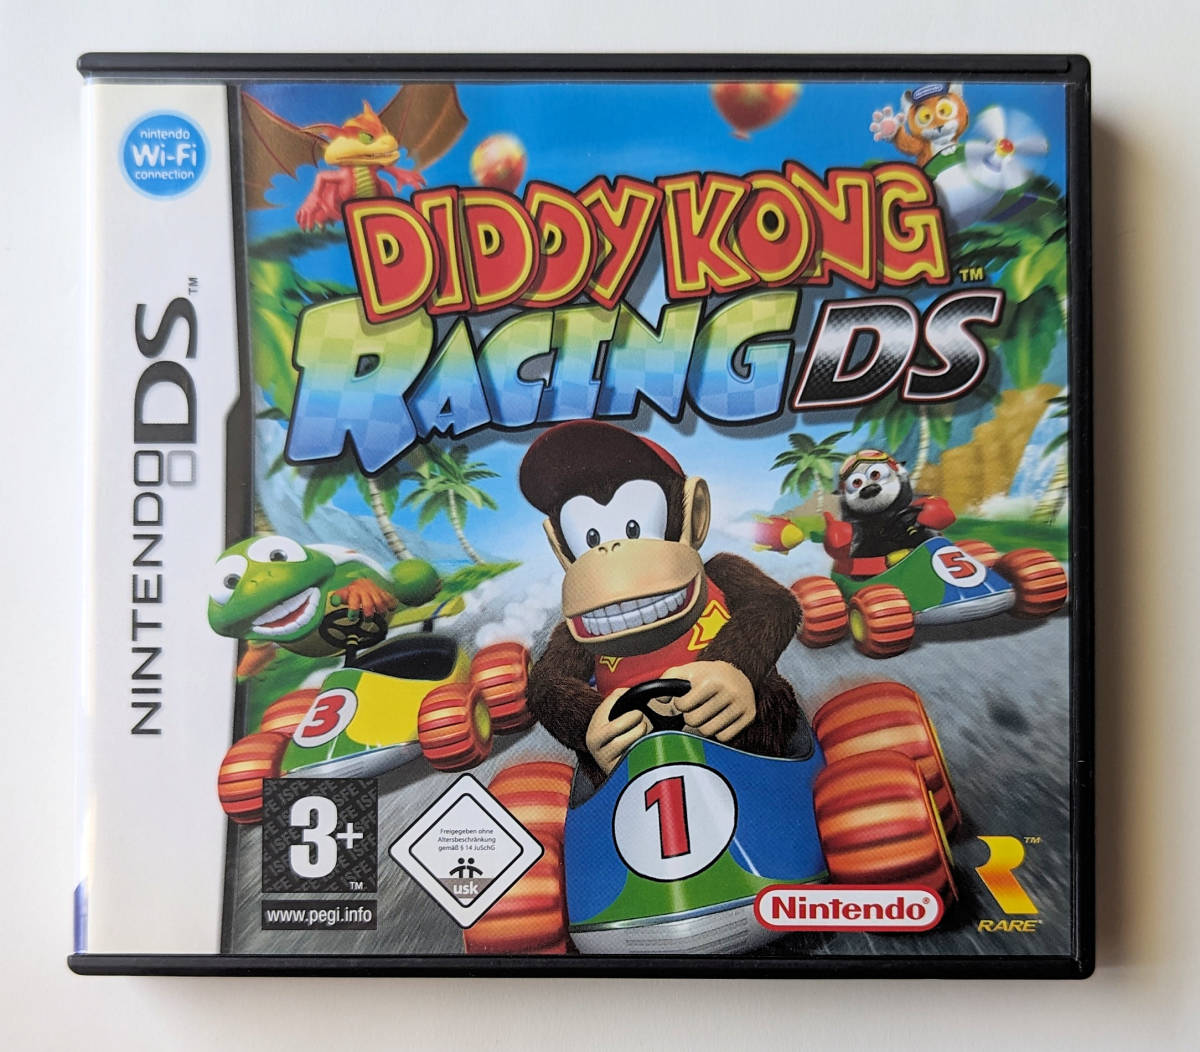 DS ディディーコングレーシング DK DIDDY KONG RACING EU版 ★ ニンテンドーDS / 2DS / 3DS